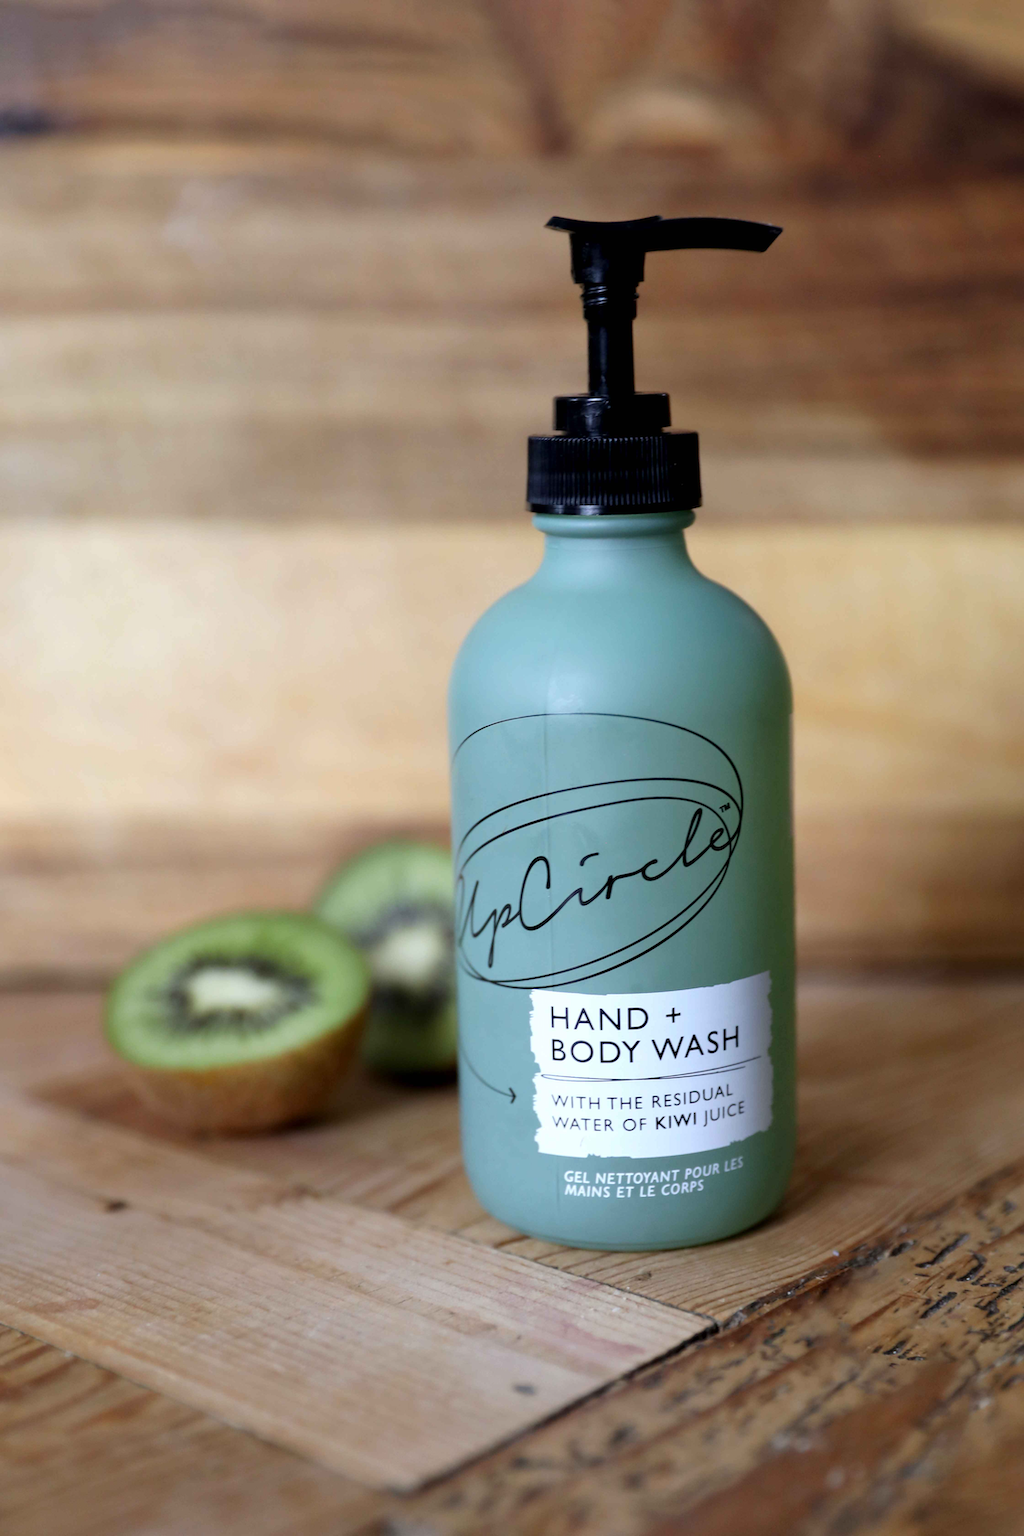 upcircle kiwi hand and body wash lifestyle image with the green glass bottle and black plastic pump sitting on a wooden board with a halved kiwi fruit in the background